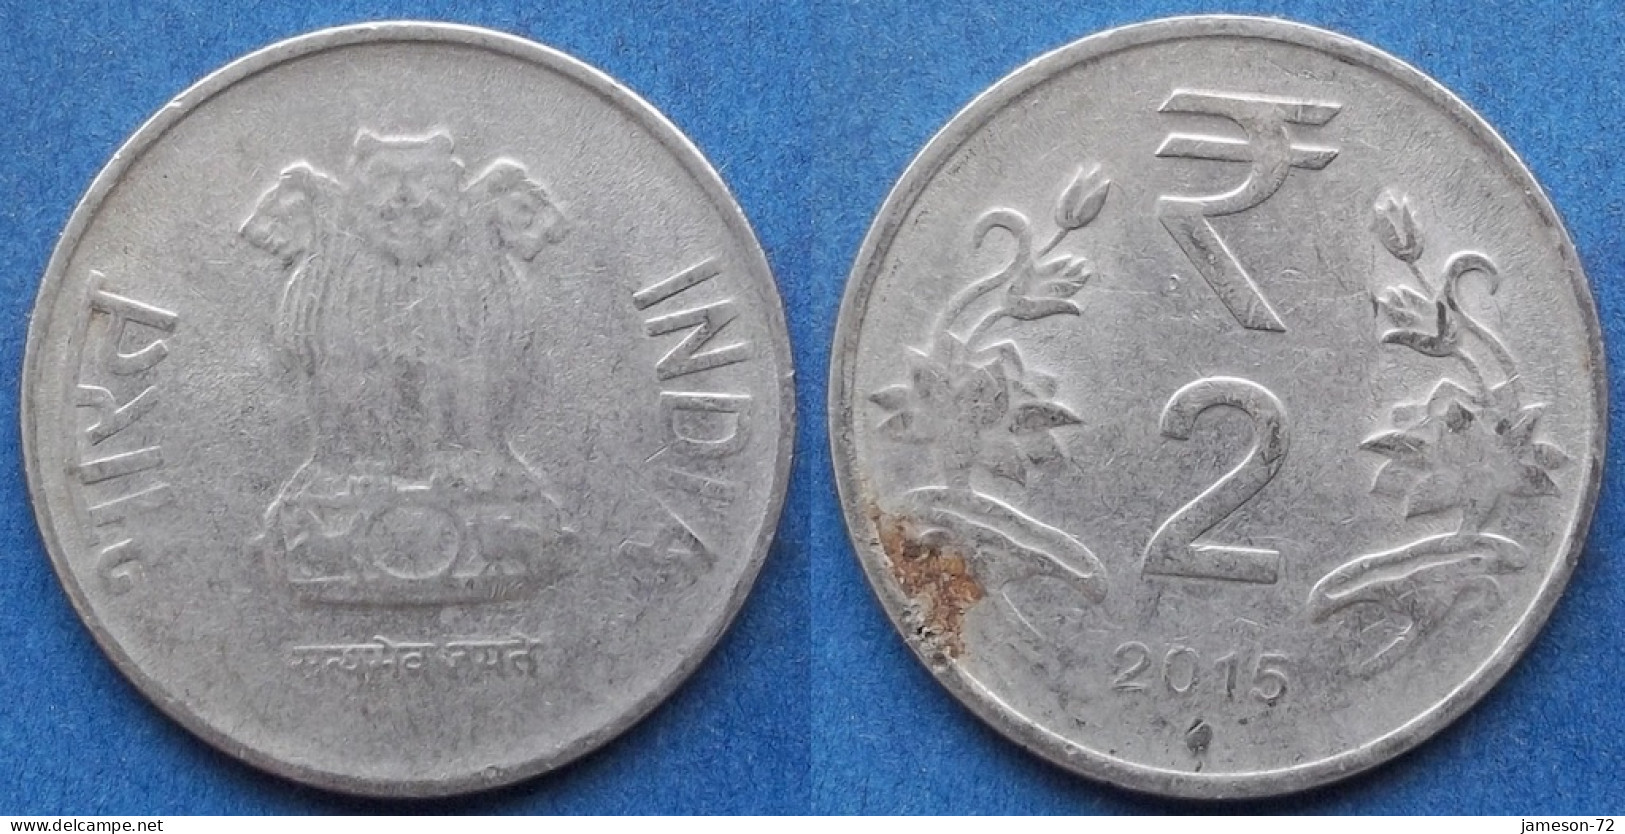 INDIA - 2 Rupees 2015 "Lotus Flowers" KM# 395 Republic Decimal Coinage (1957) - Edelweiss Coins - Georgia